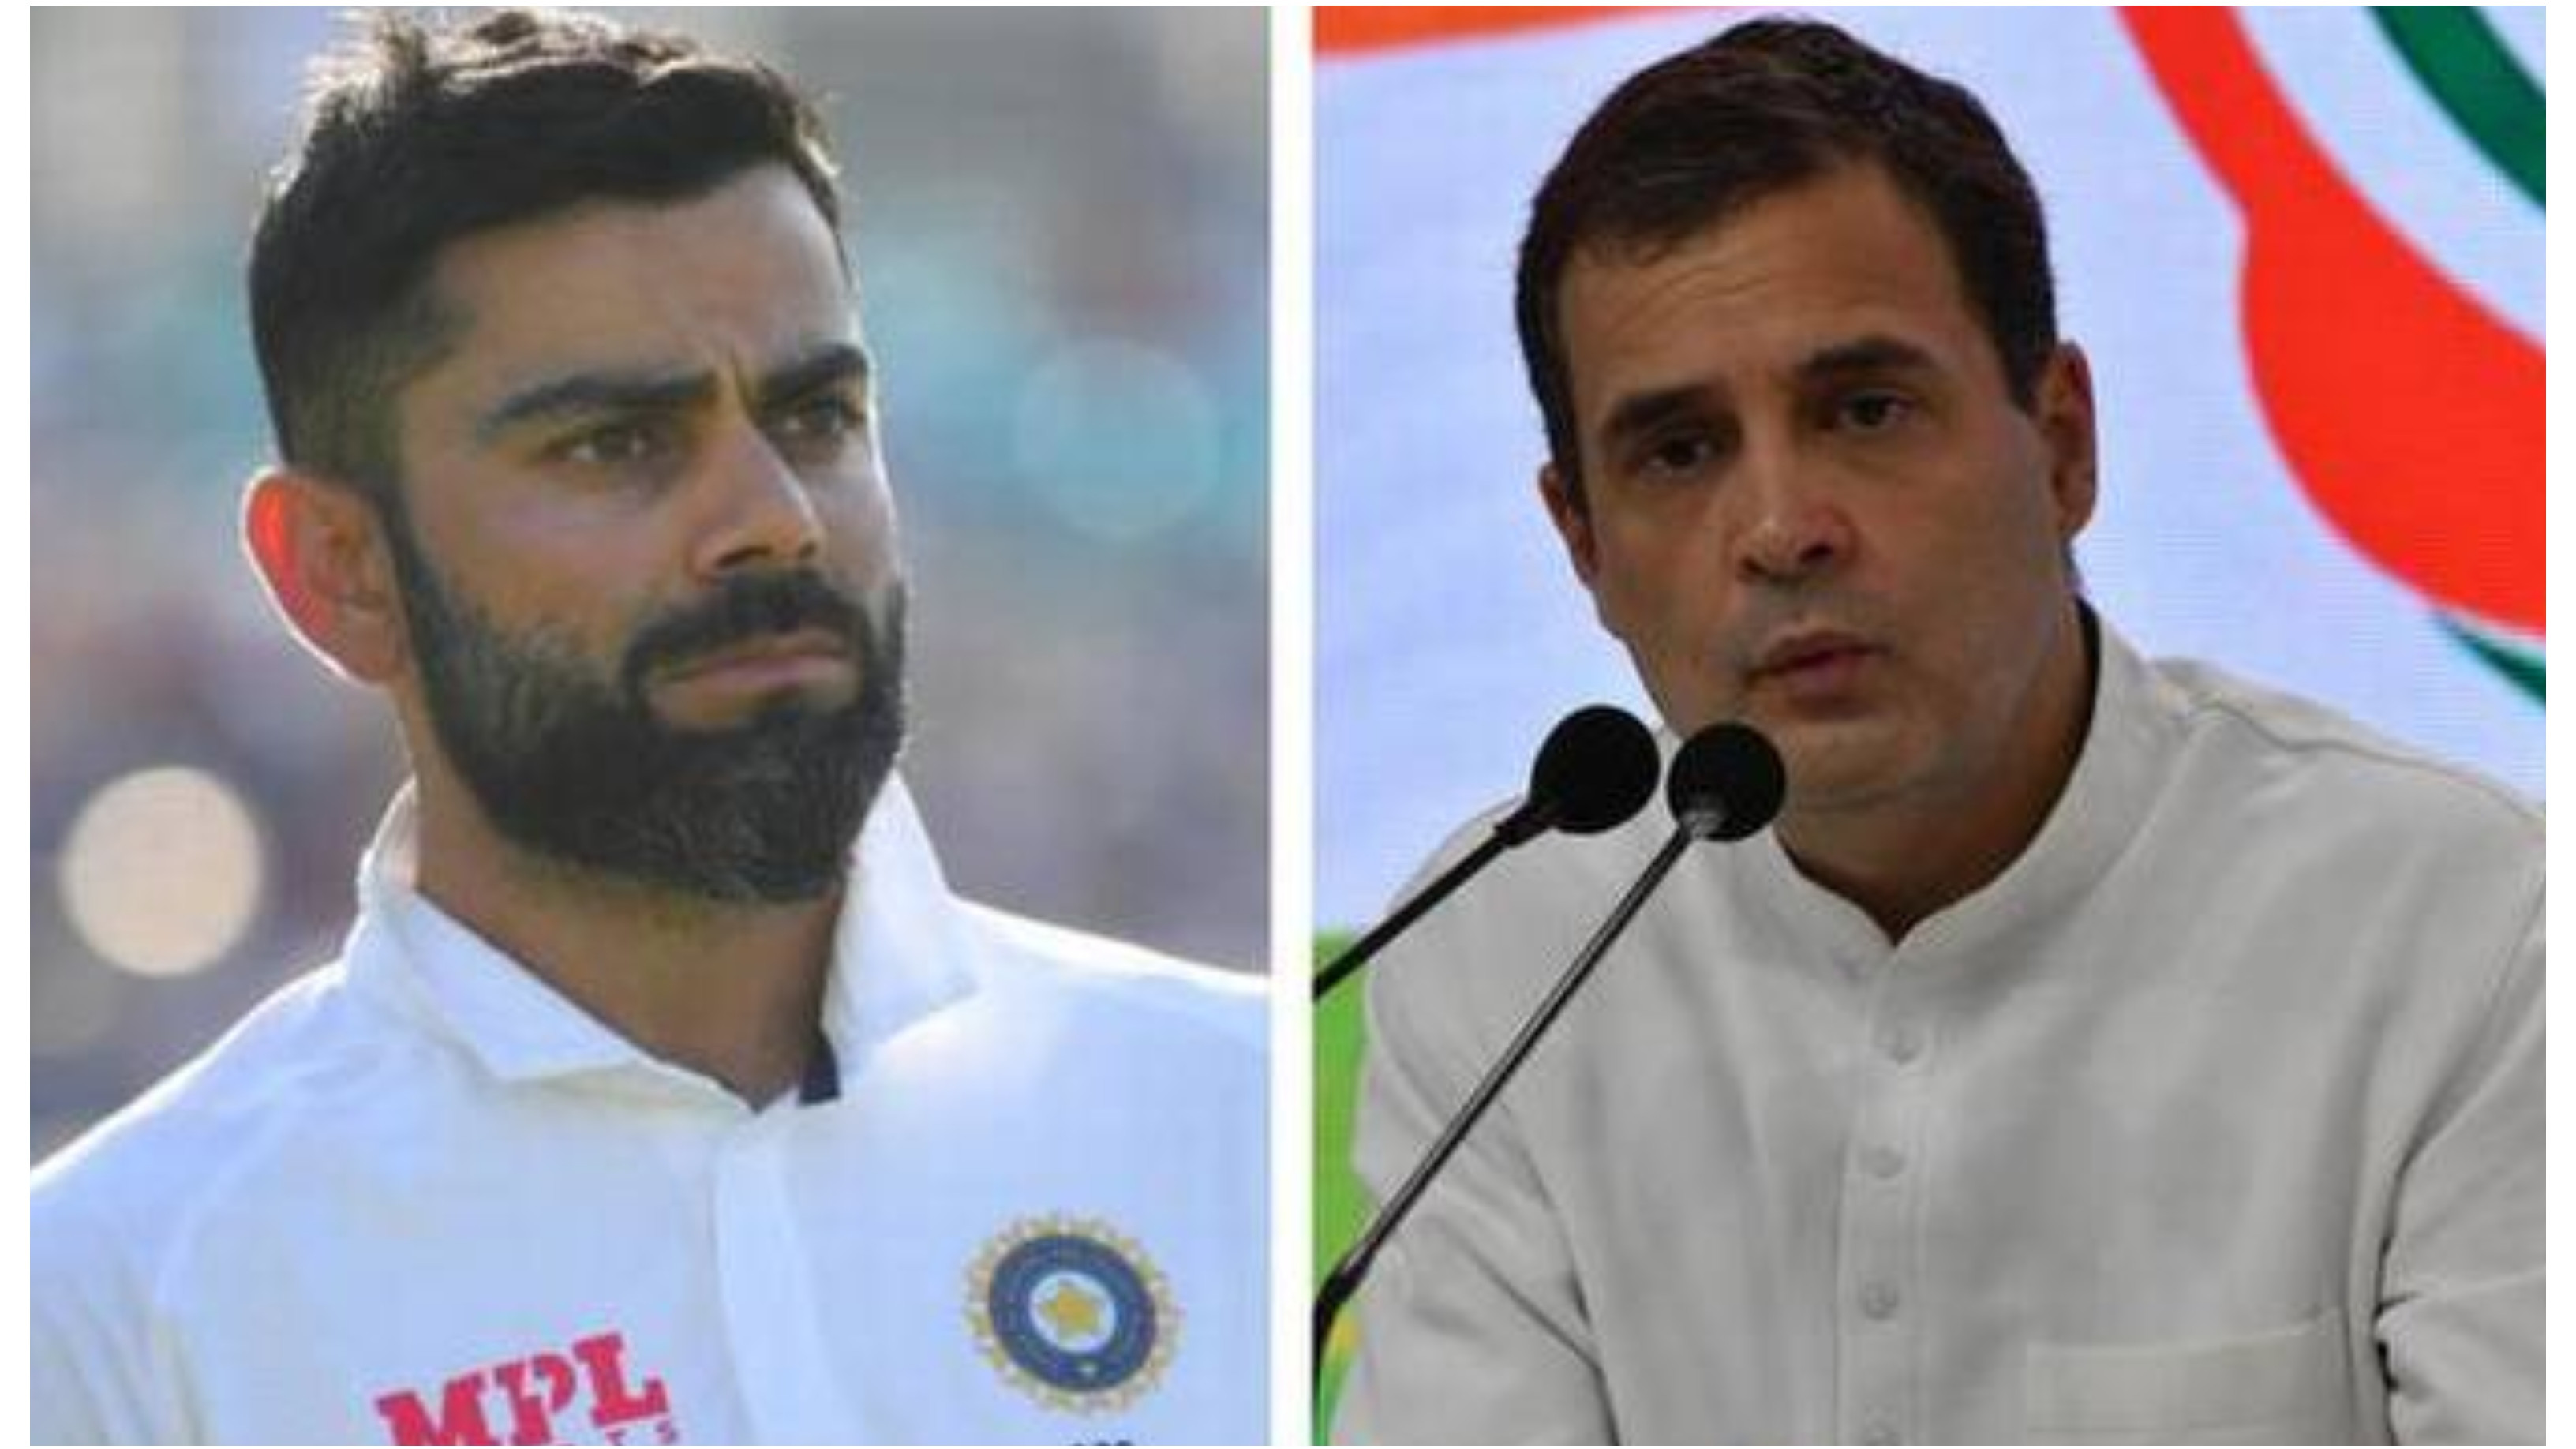 ‘Best wishes for the various other innings to come’: Rahul Gandhi's message to Virat Kohli